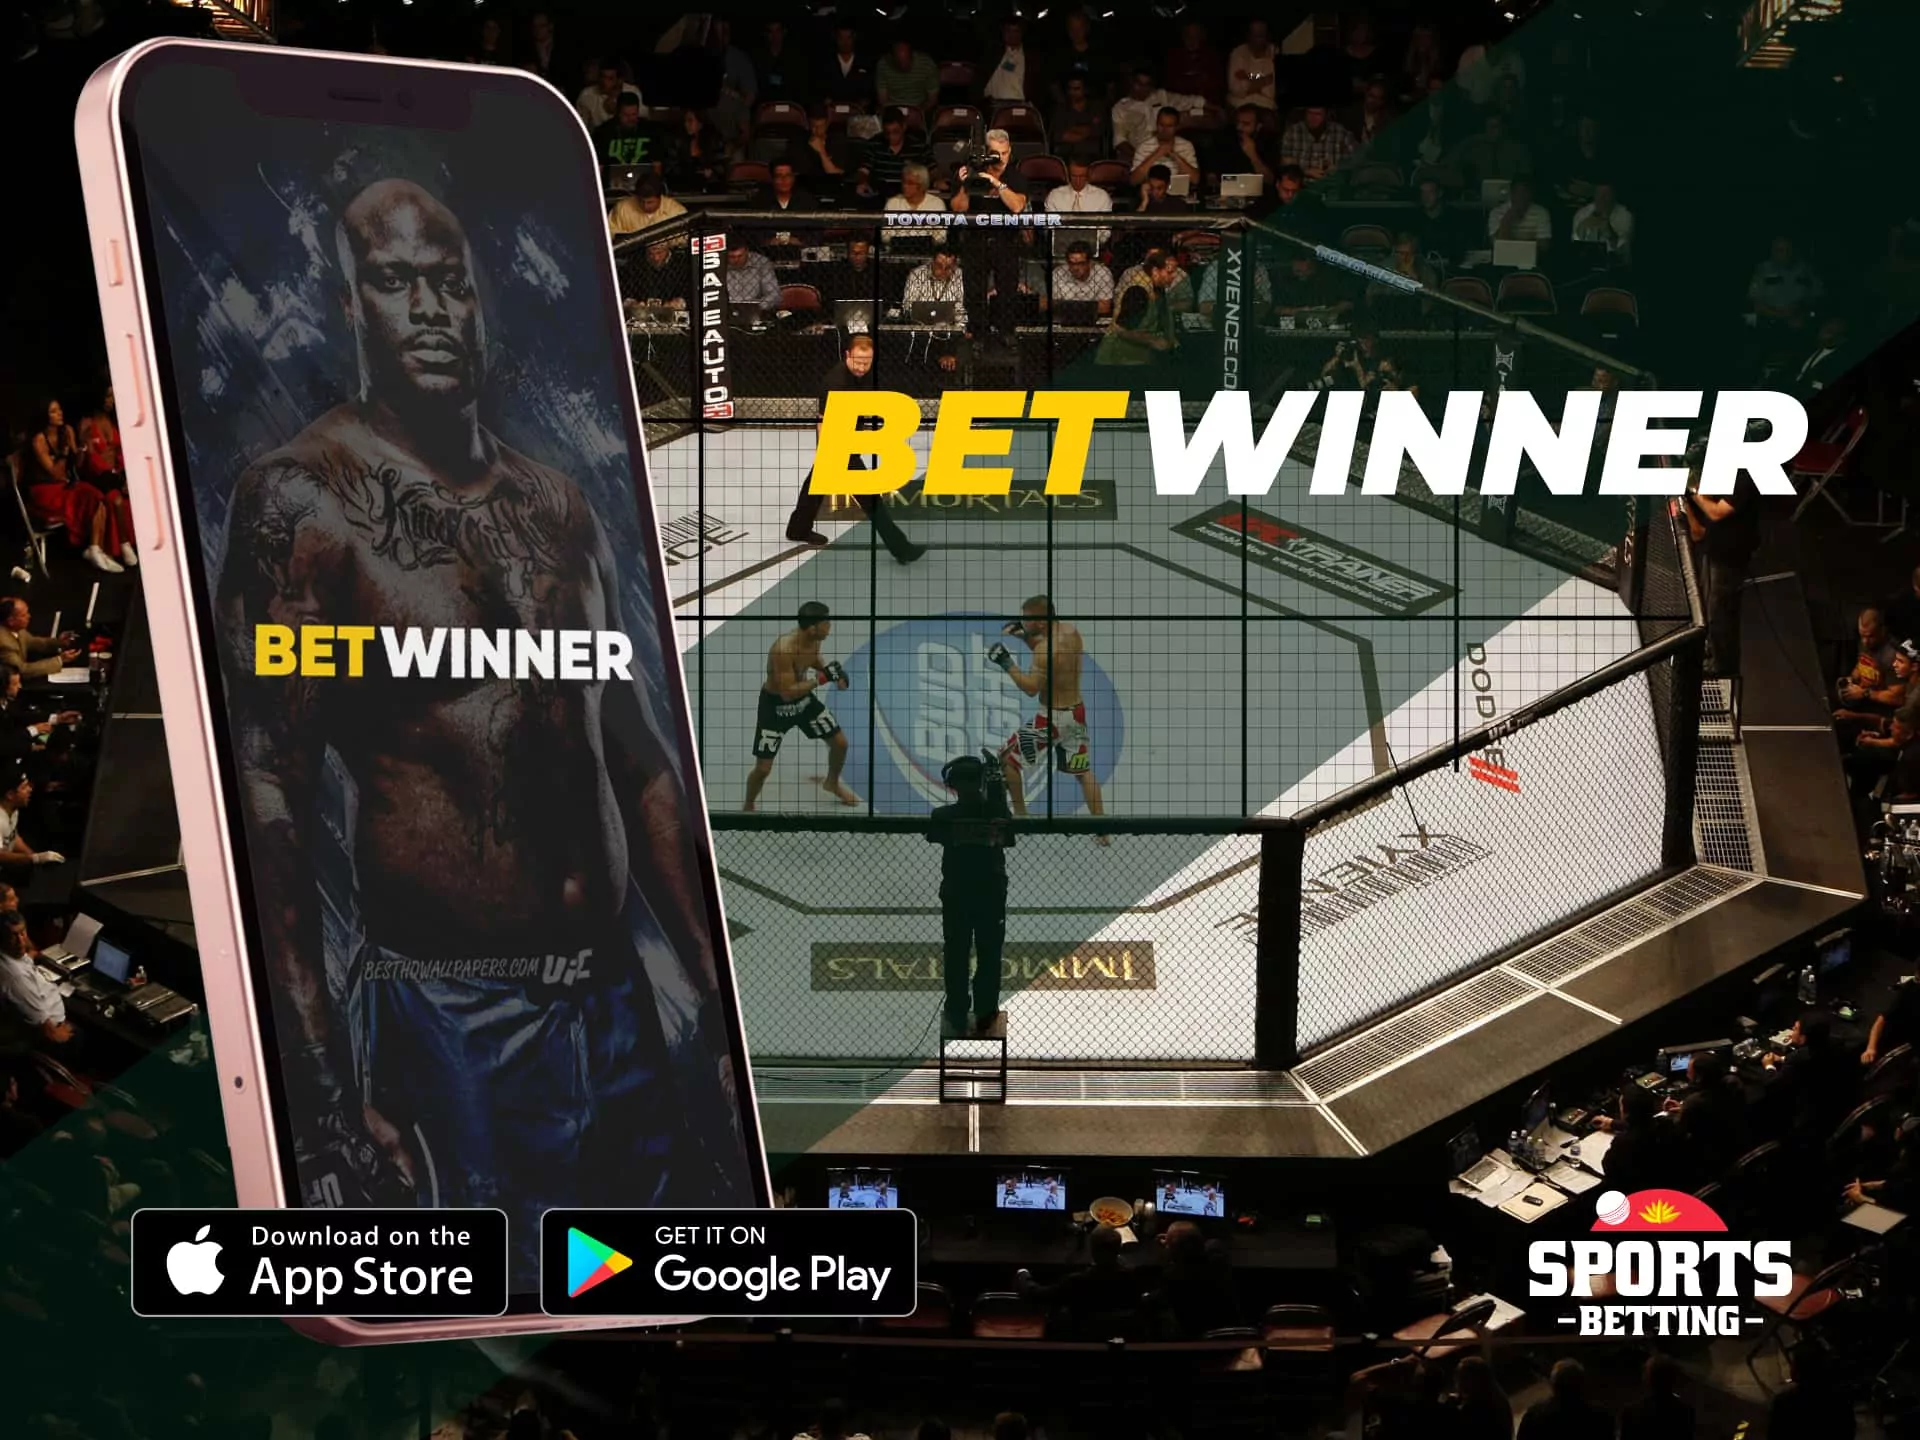 BetWinner UFC betting app with live opportunities.